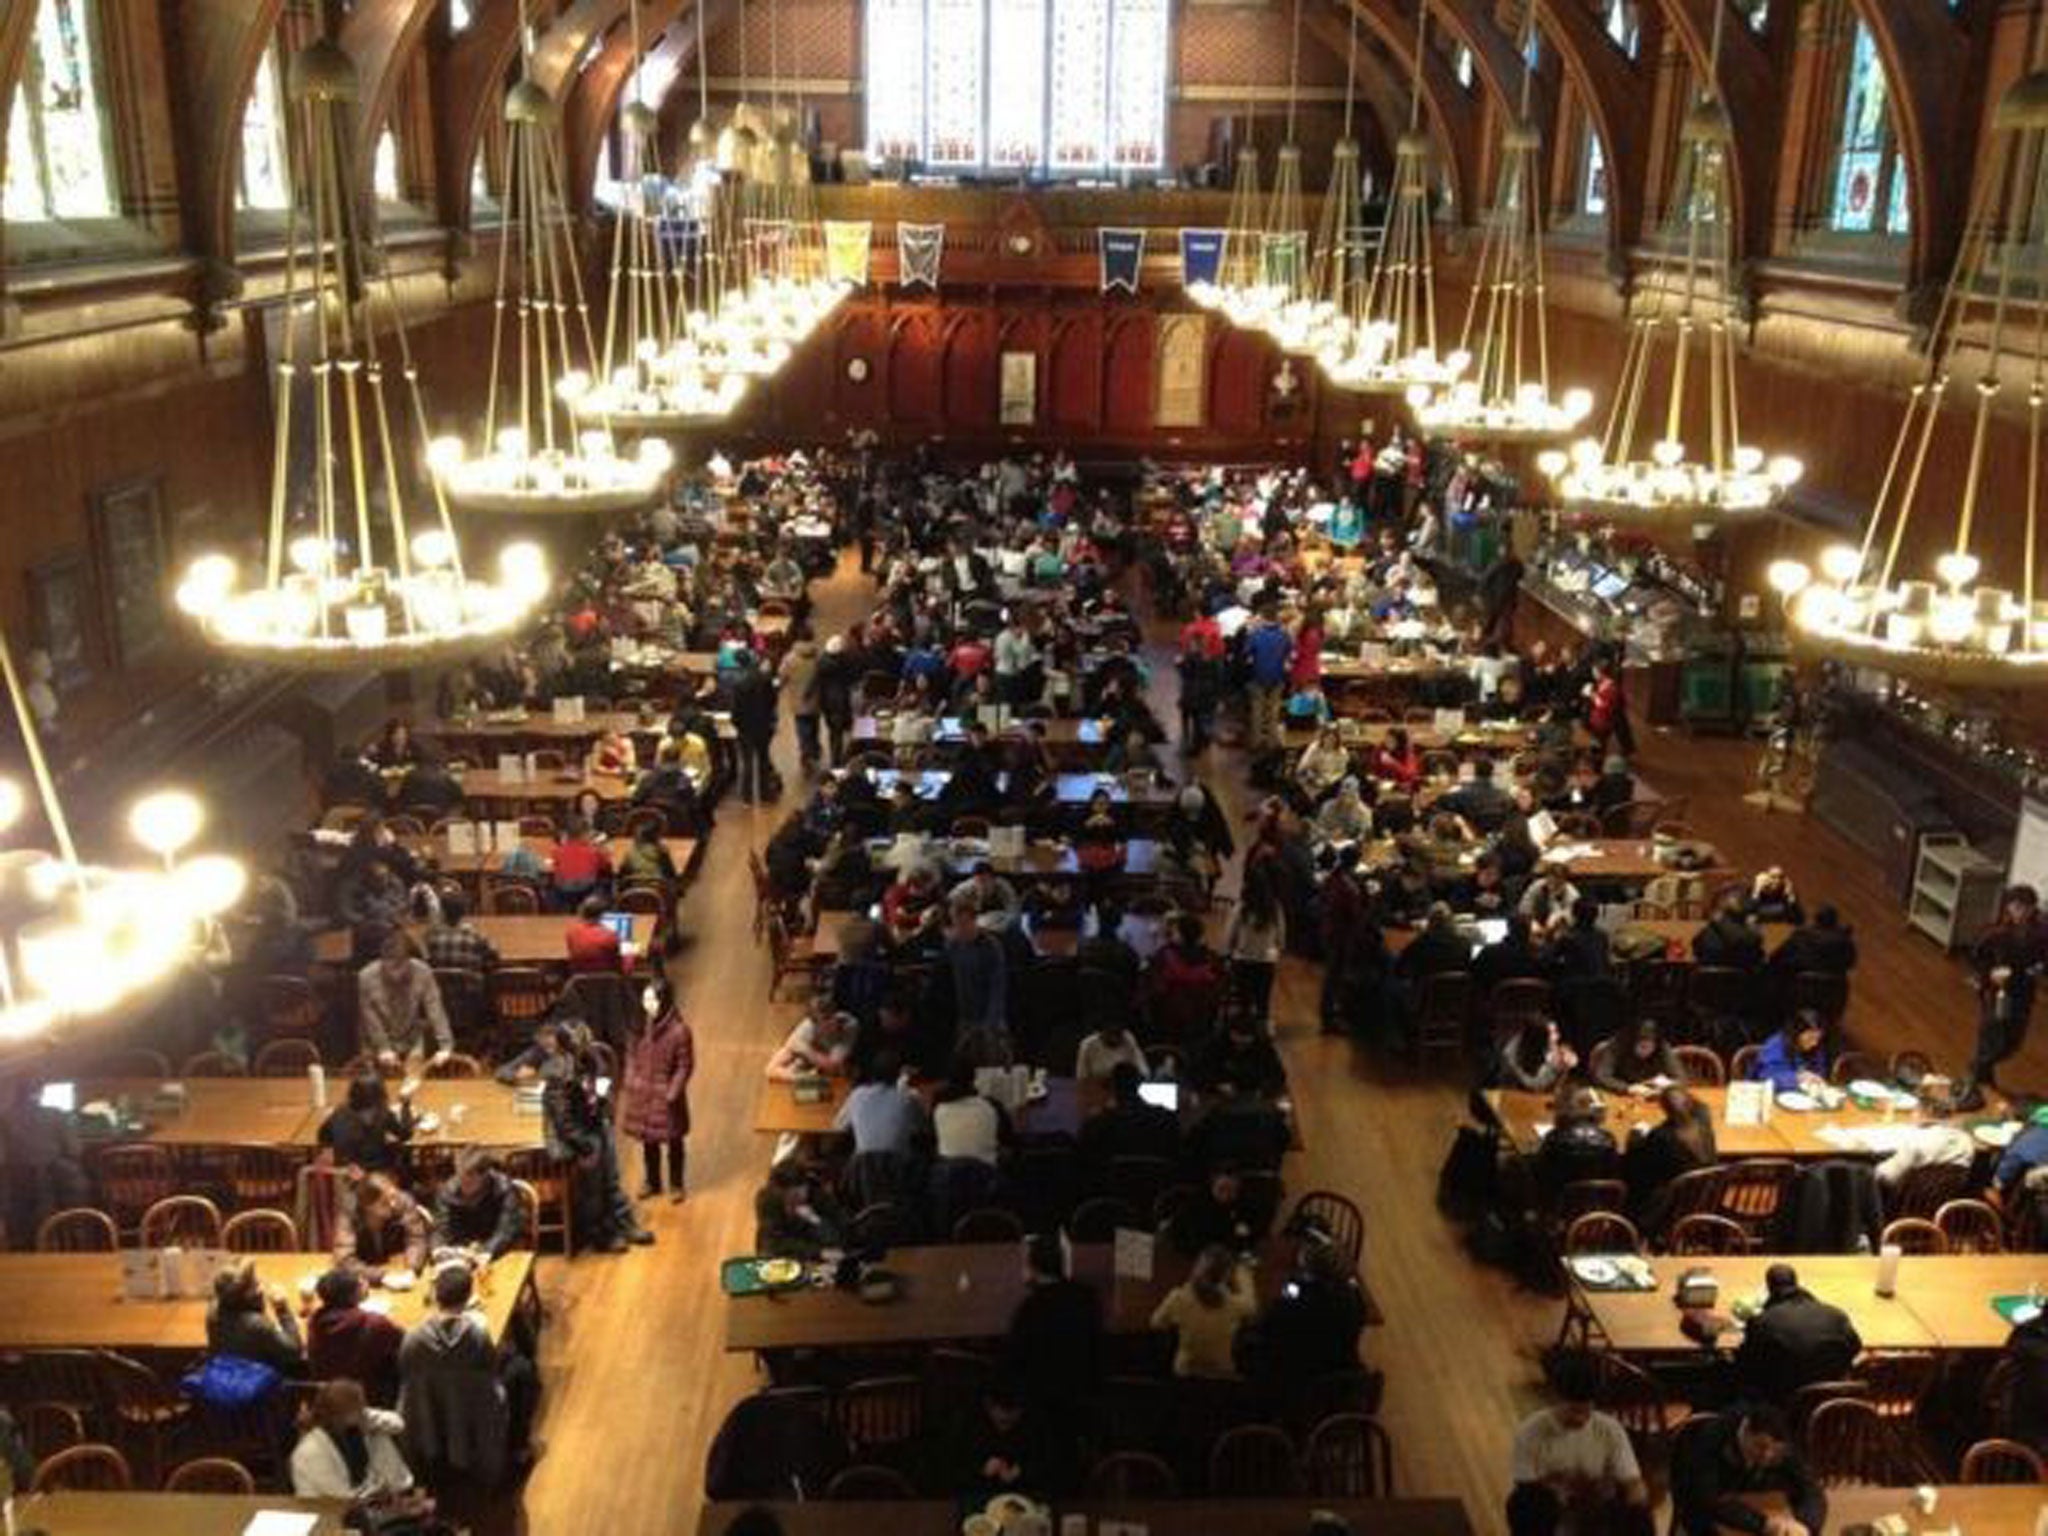 Students gather at Harvard University's Annenberg Hall after being evacuated from campus buildings following an unconfirmed bomb threat